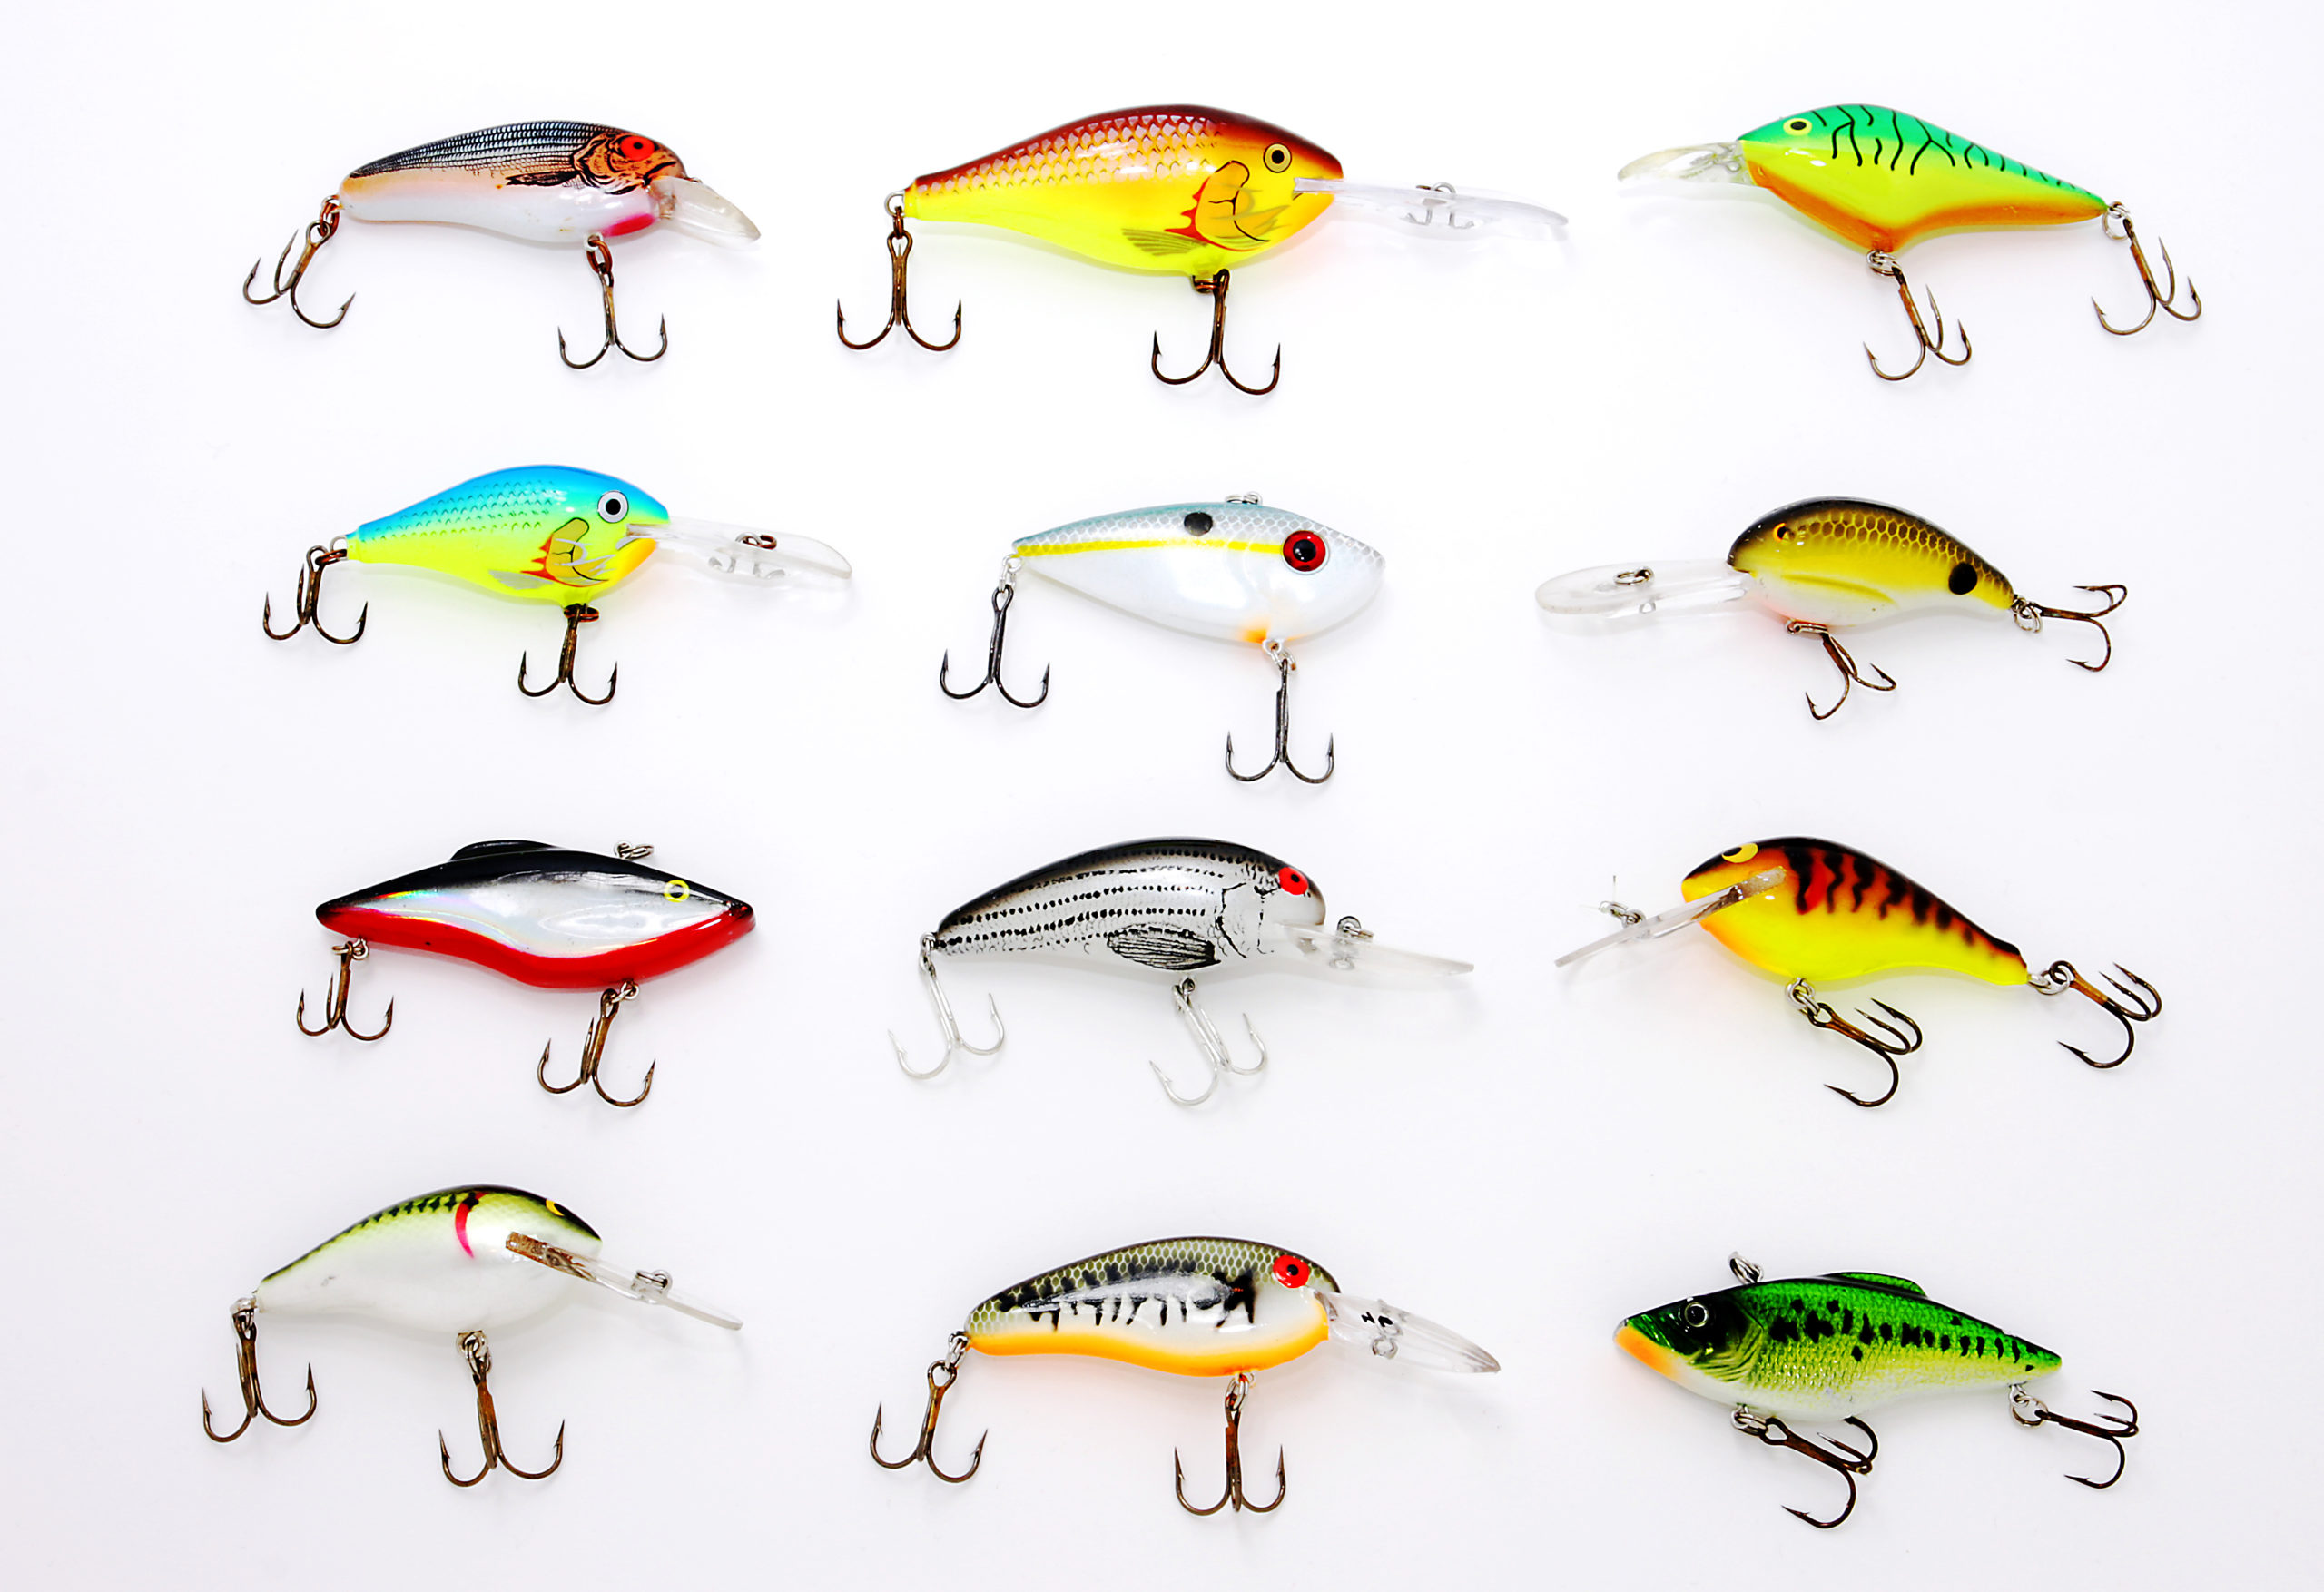 Tips for Fishing With a Spoon Lure
